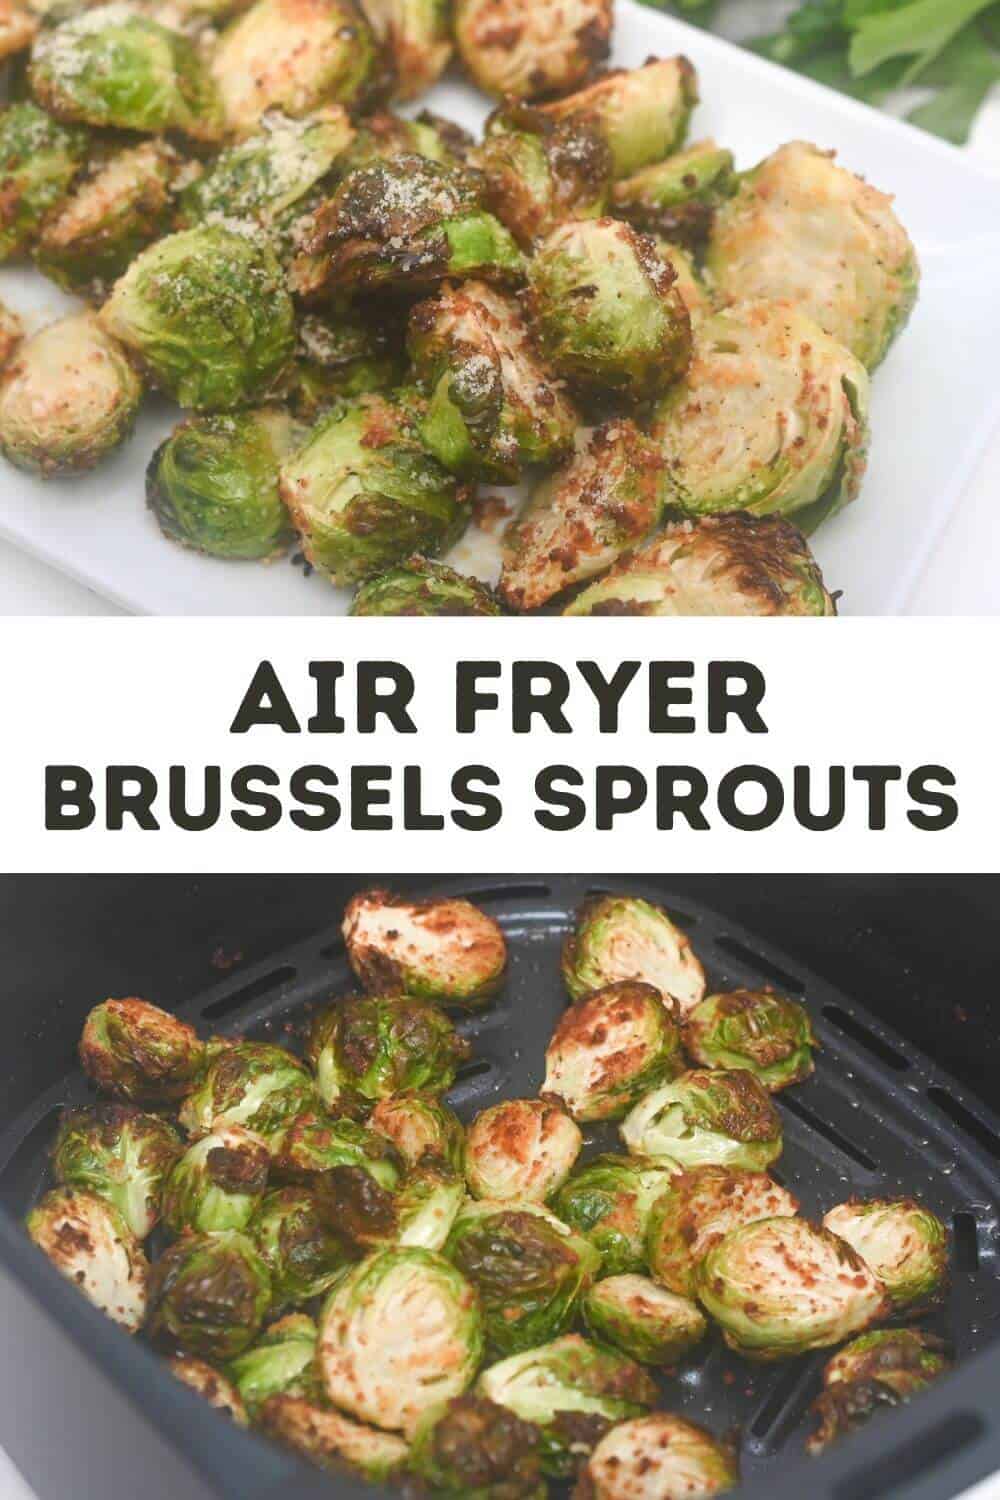 Air fryer brussels sprouts with the text air fryer brussels sprouts.